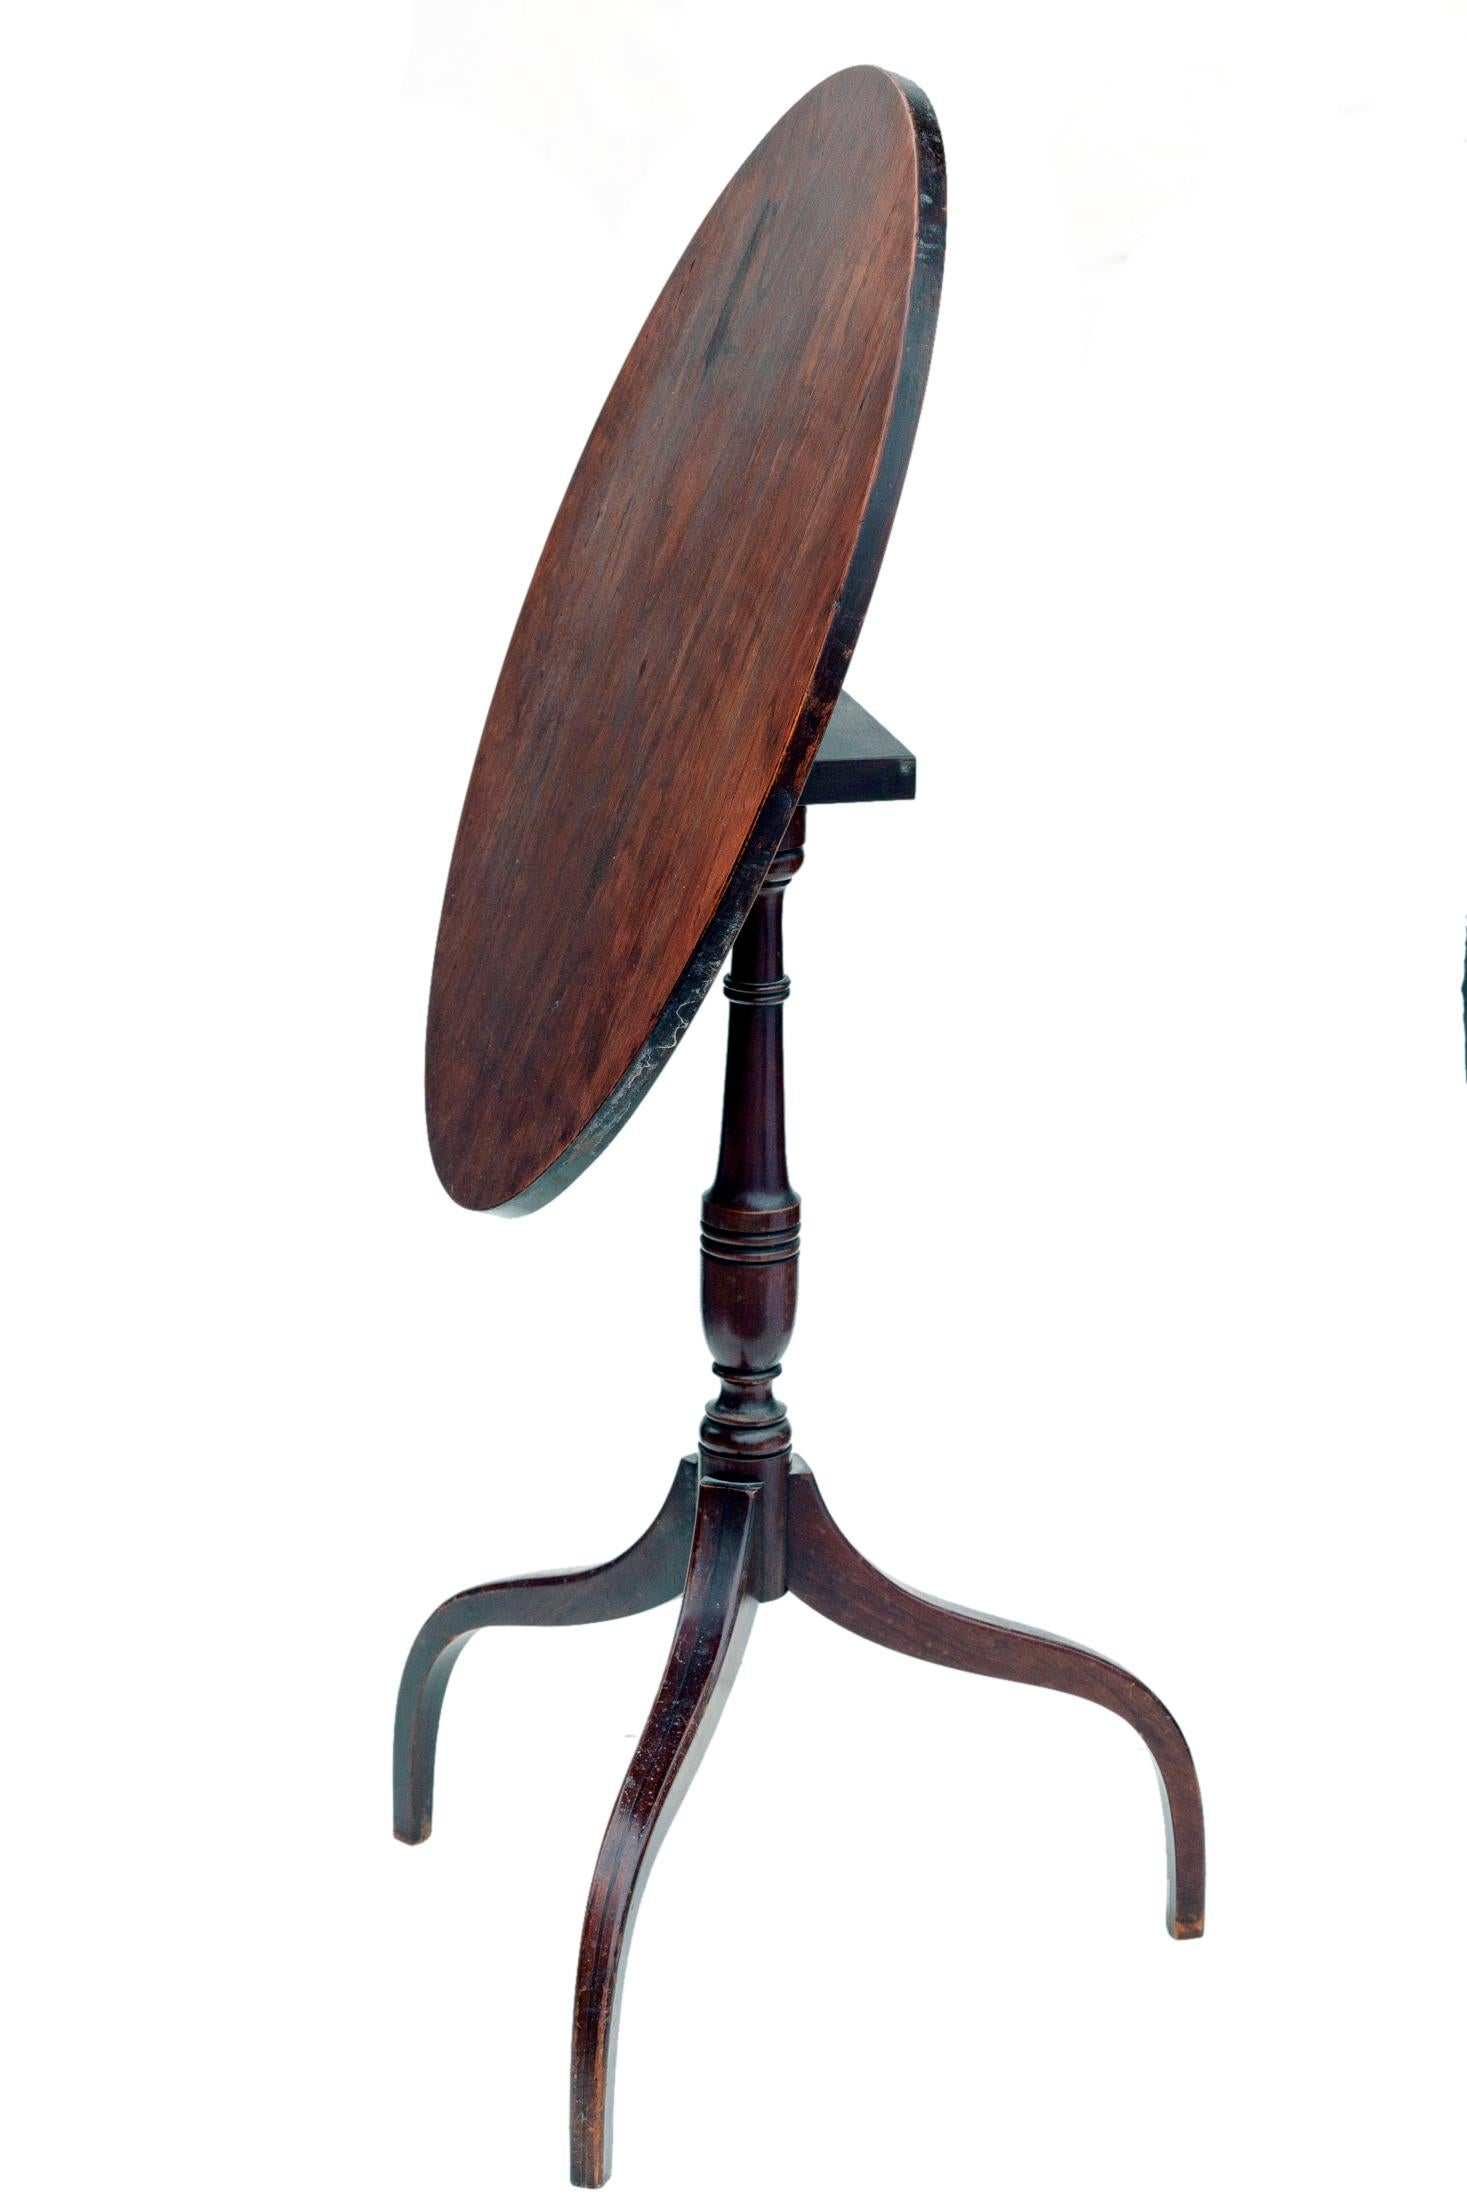 Graceful tapered oval tilt-top table. Tilt top rests on pedestal & tripod legs.
New finish to the top. Sturdy construction.
Fully functional.